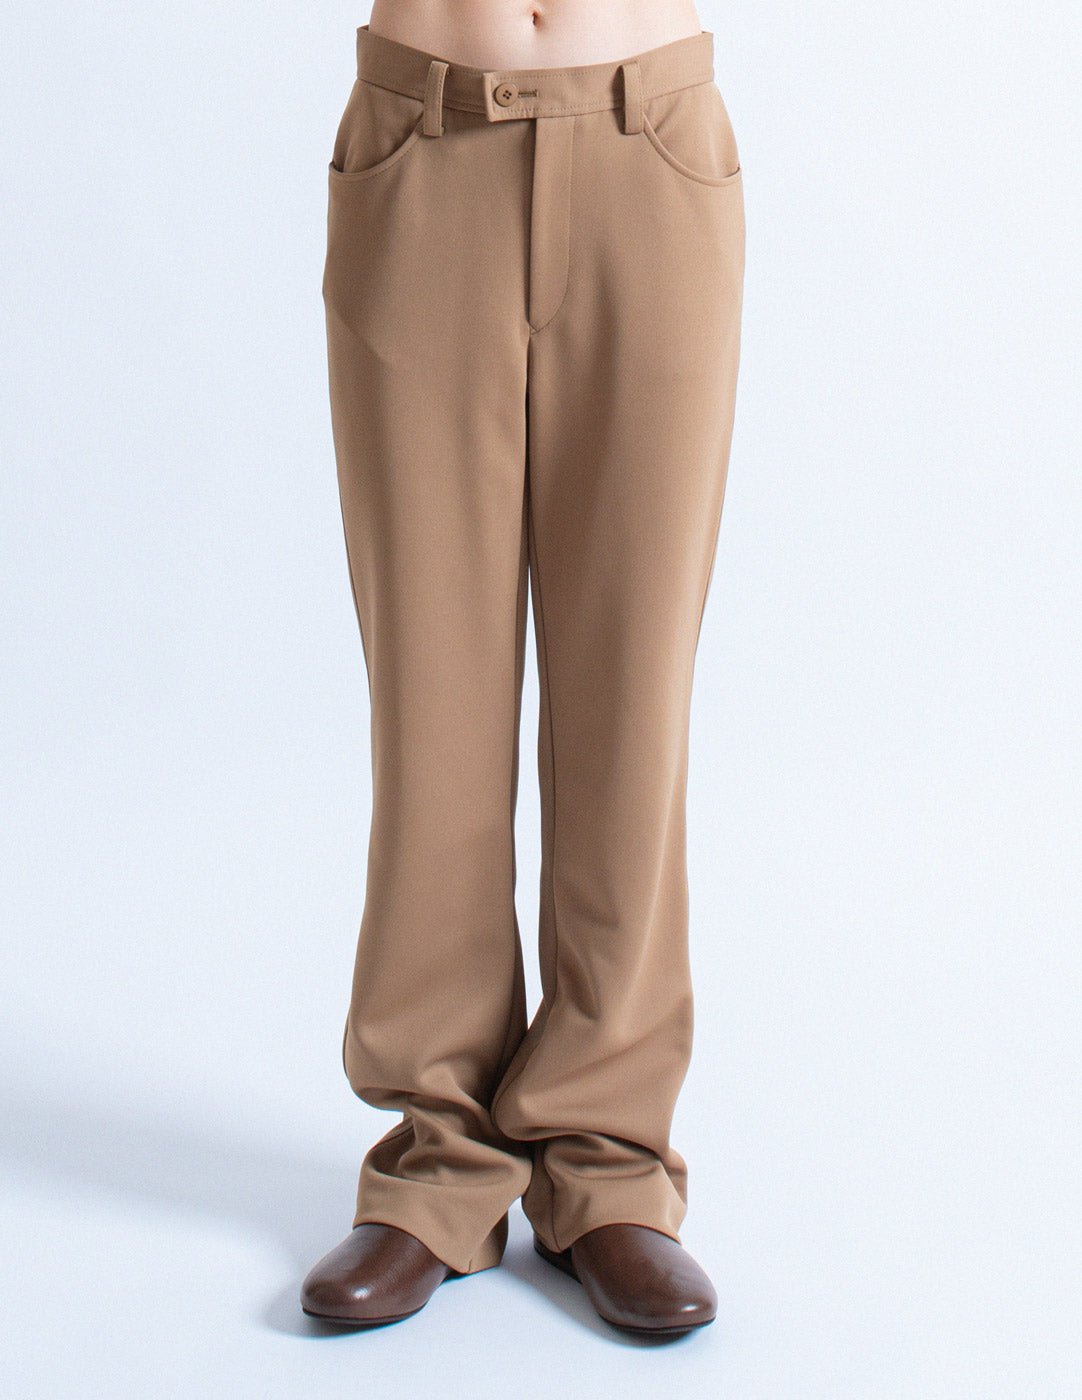 Issey Miyake camel tone long blazer and trousers set trousers detail